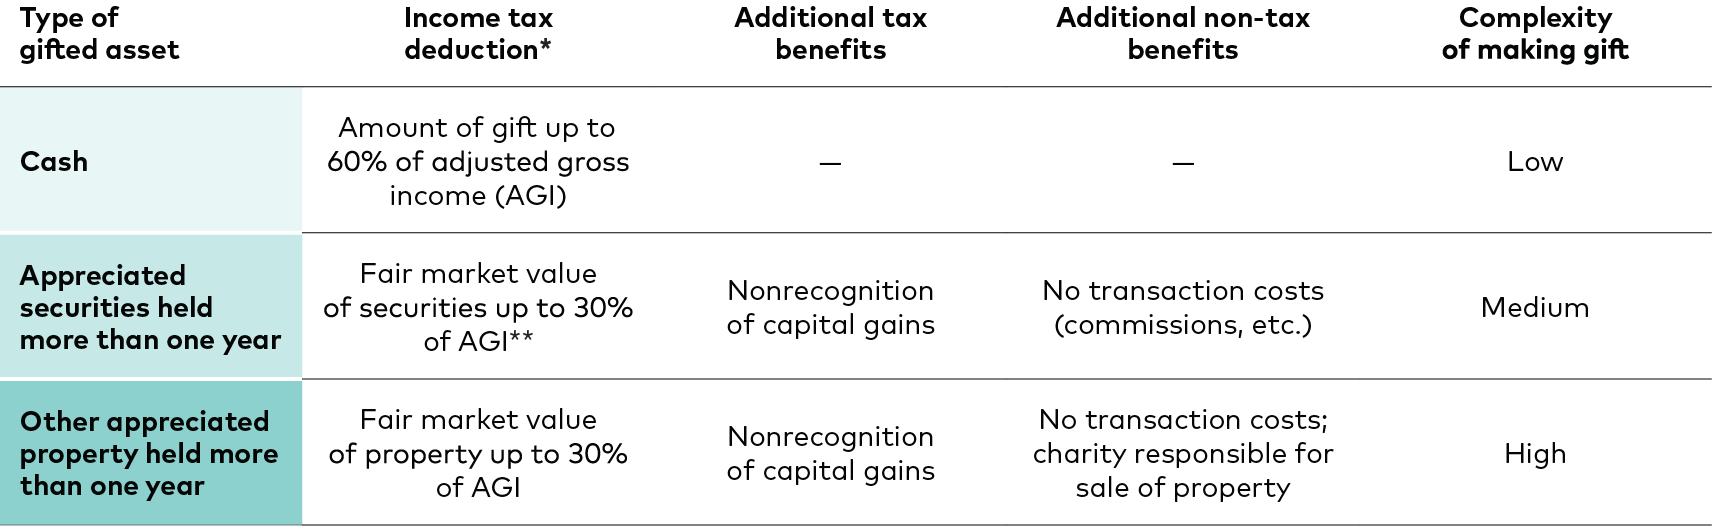 The illustration displays the effects of donor gifting by asset type. Cash gifts receive an income tax deduction up to the amount of the gift, up to 60% of the donor’s adjusted gross income with a low complexity associated with making the gift. Appreciated securities held more than one year will receive a deduction of the fair market value of the securities, up to 30% of the donor’s adjusted gross income. In addition, capital gains tax is not realized and there are no transaction costs. The complexity associated with the gift is medium. For other appreciated property held for more than one year, the same income tax and capital gains benefits apply. The complexity associated with making the gift is high.